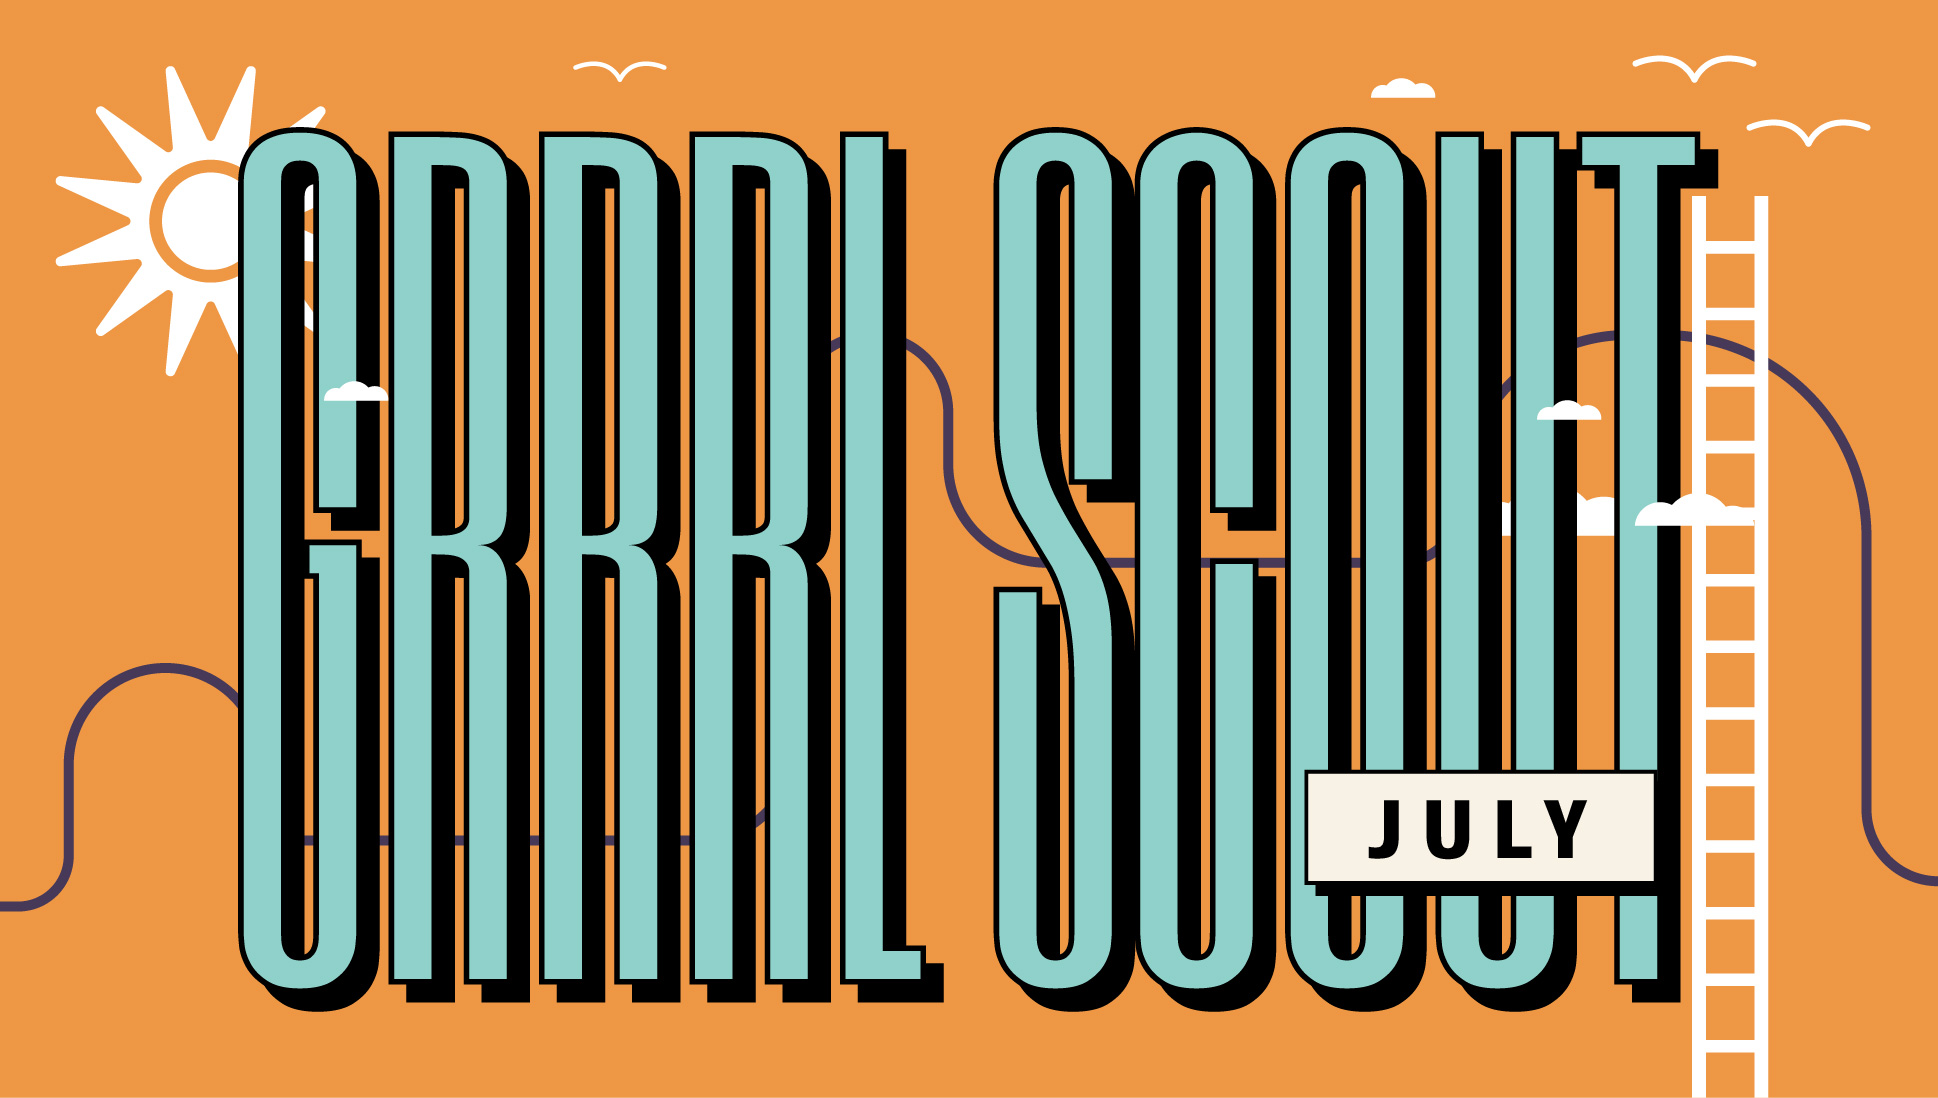 GRRRL SCOUT_ JULY QUEER DANCE PARTY.docx GRRRL SCOUT: JULY QUEER DANCE PARTY Date: 7/9/2022 Time: 9:30 p.m. – 1:00 a.m. Parking: Street parking Tickets: (21+ Event) $10 + Fees Early Bird (Limited Availability) $14 +Fees ( Advance) $20 + Fees (Day of Show